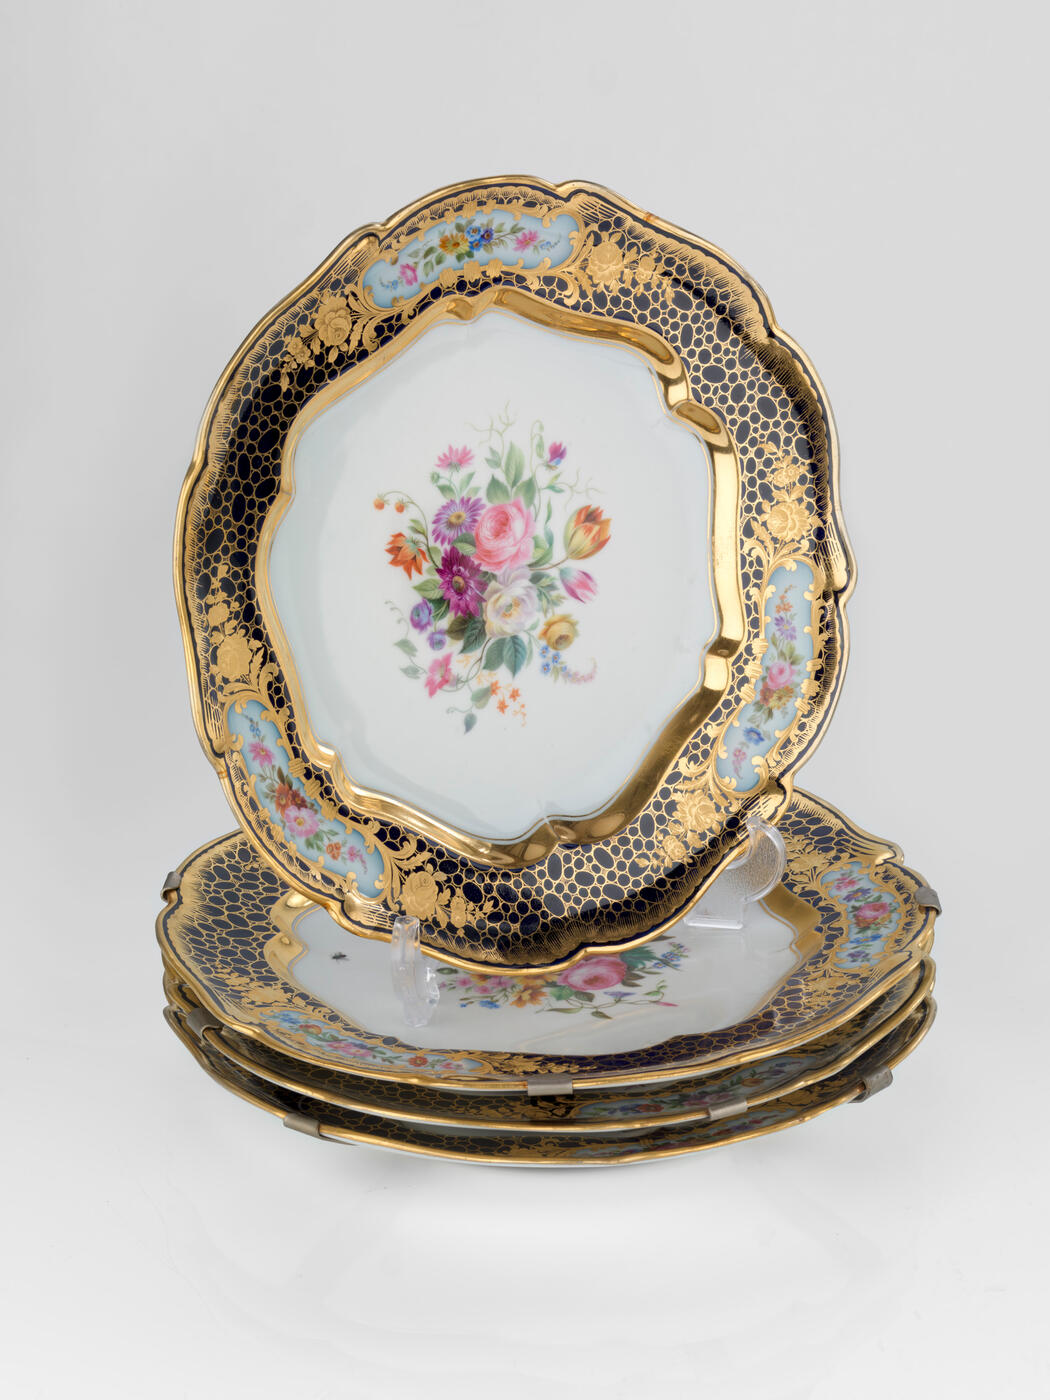 A Set of Four Dinner Plates from the Sèvres Service